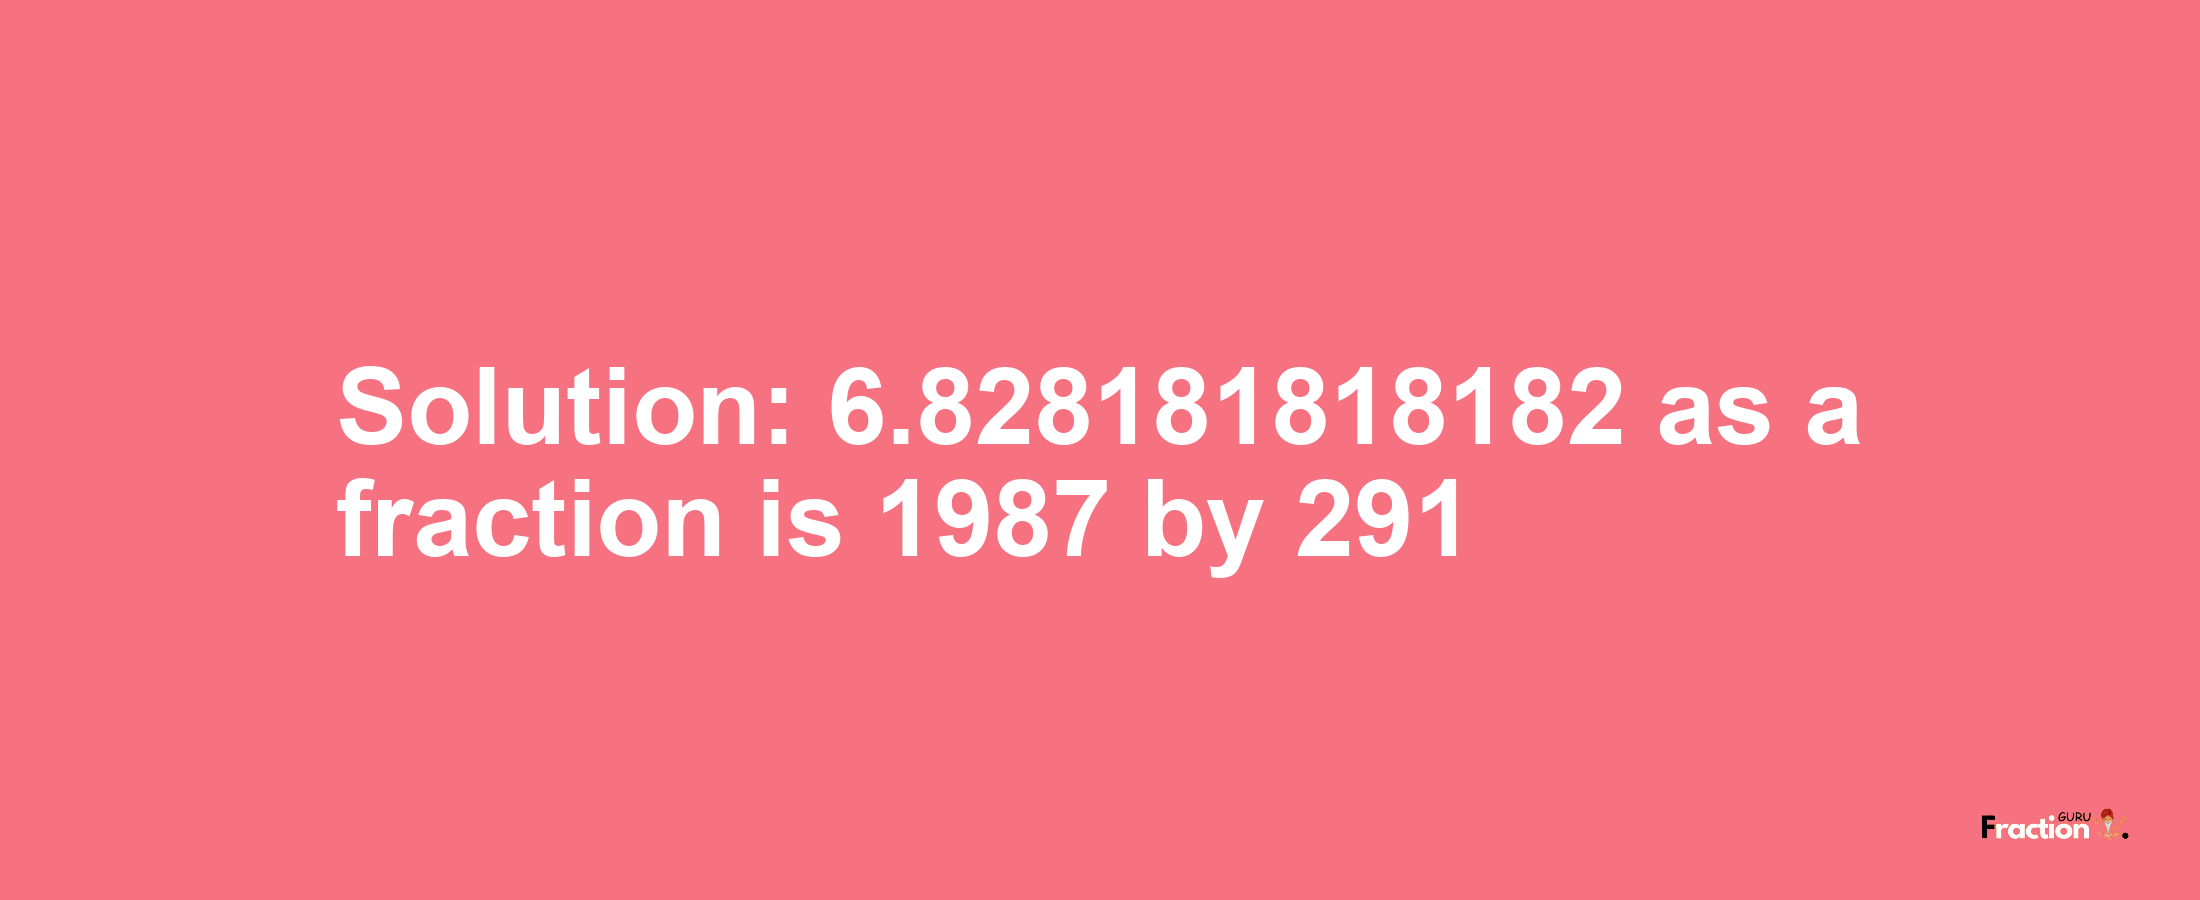 Solution:6.828181818182 as a fraction is 1987/291